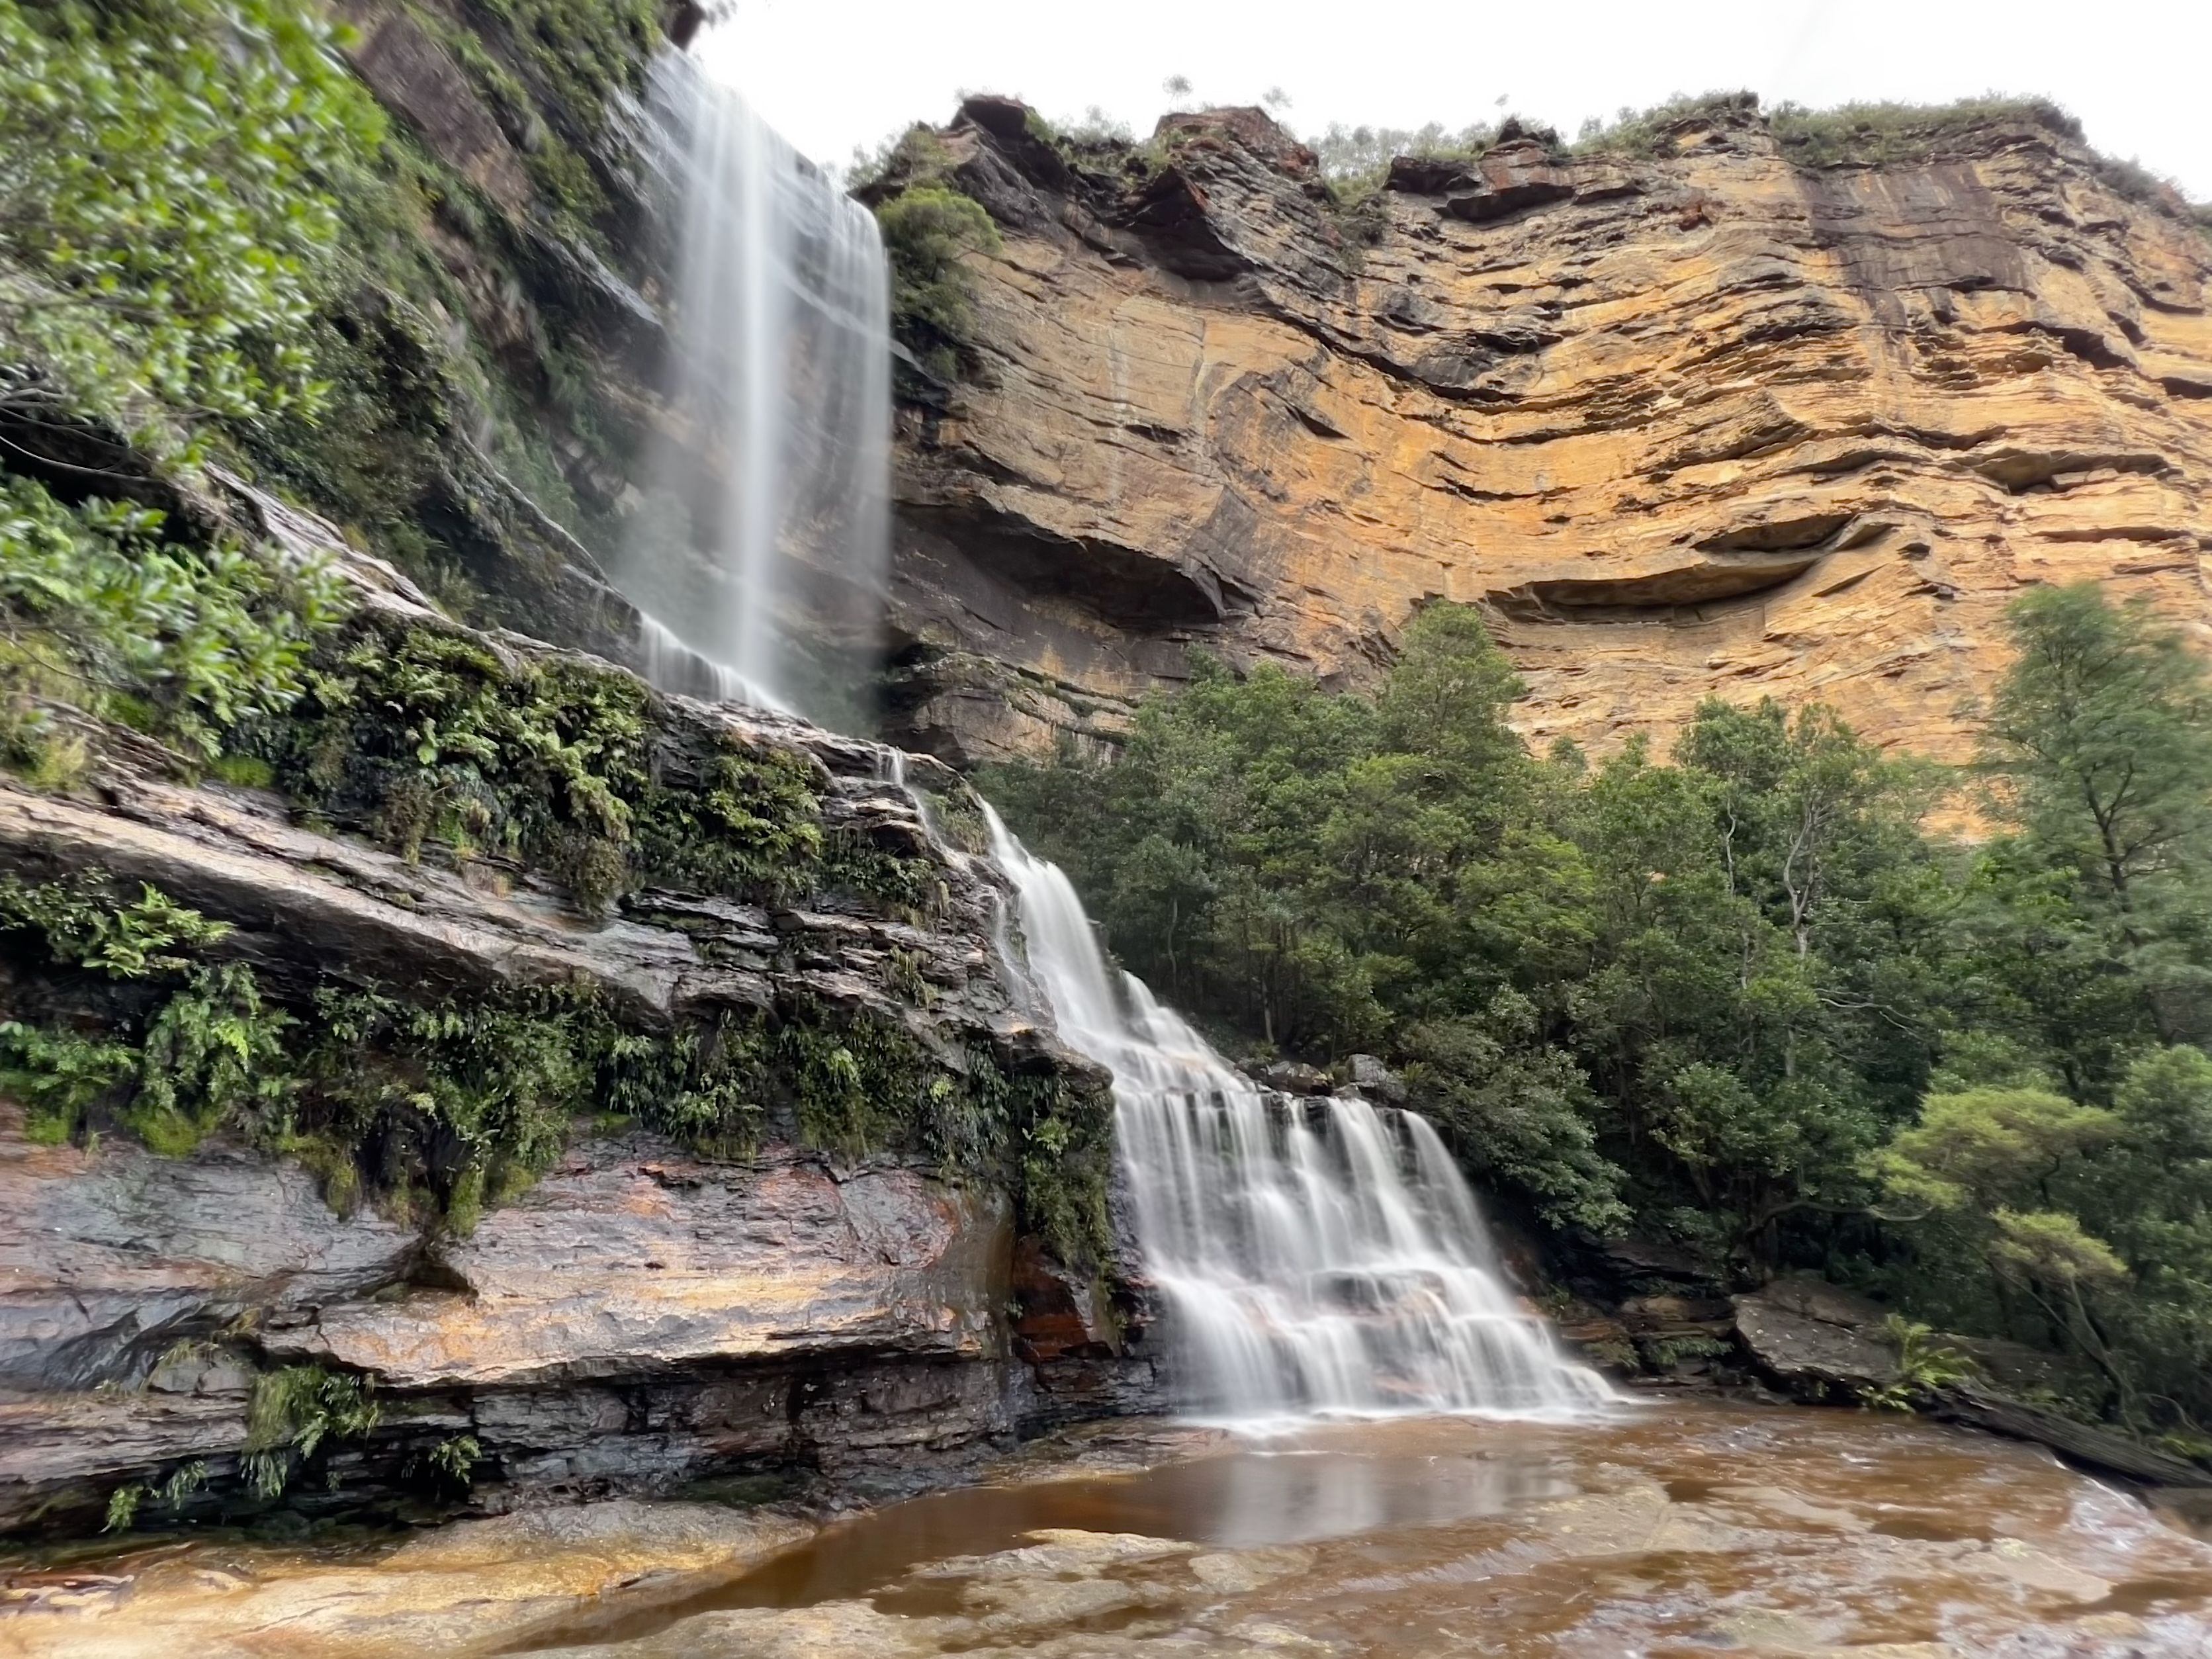 An iPhone Live Photo Long Exposure shot in the Blue Mountains, New South Wales, Australia.